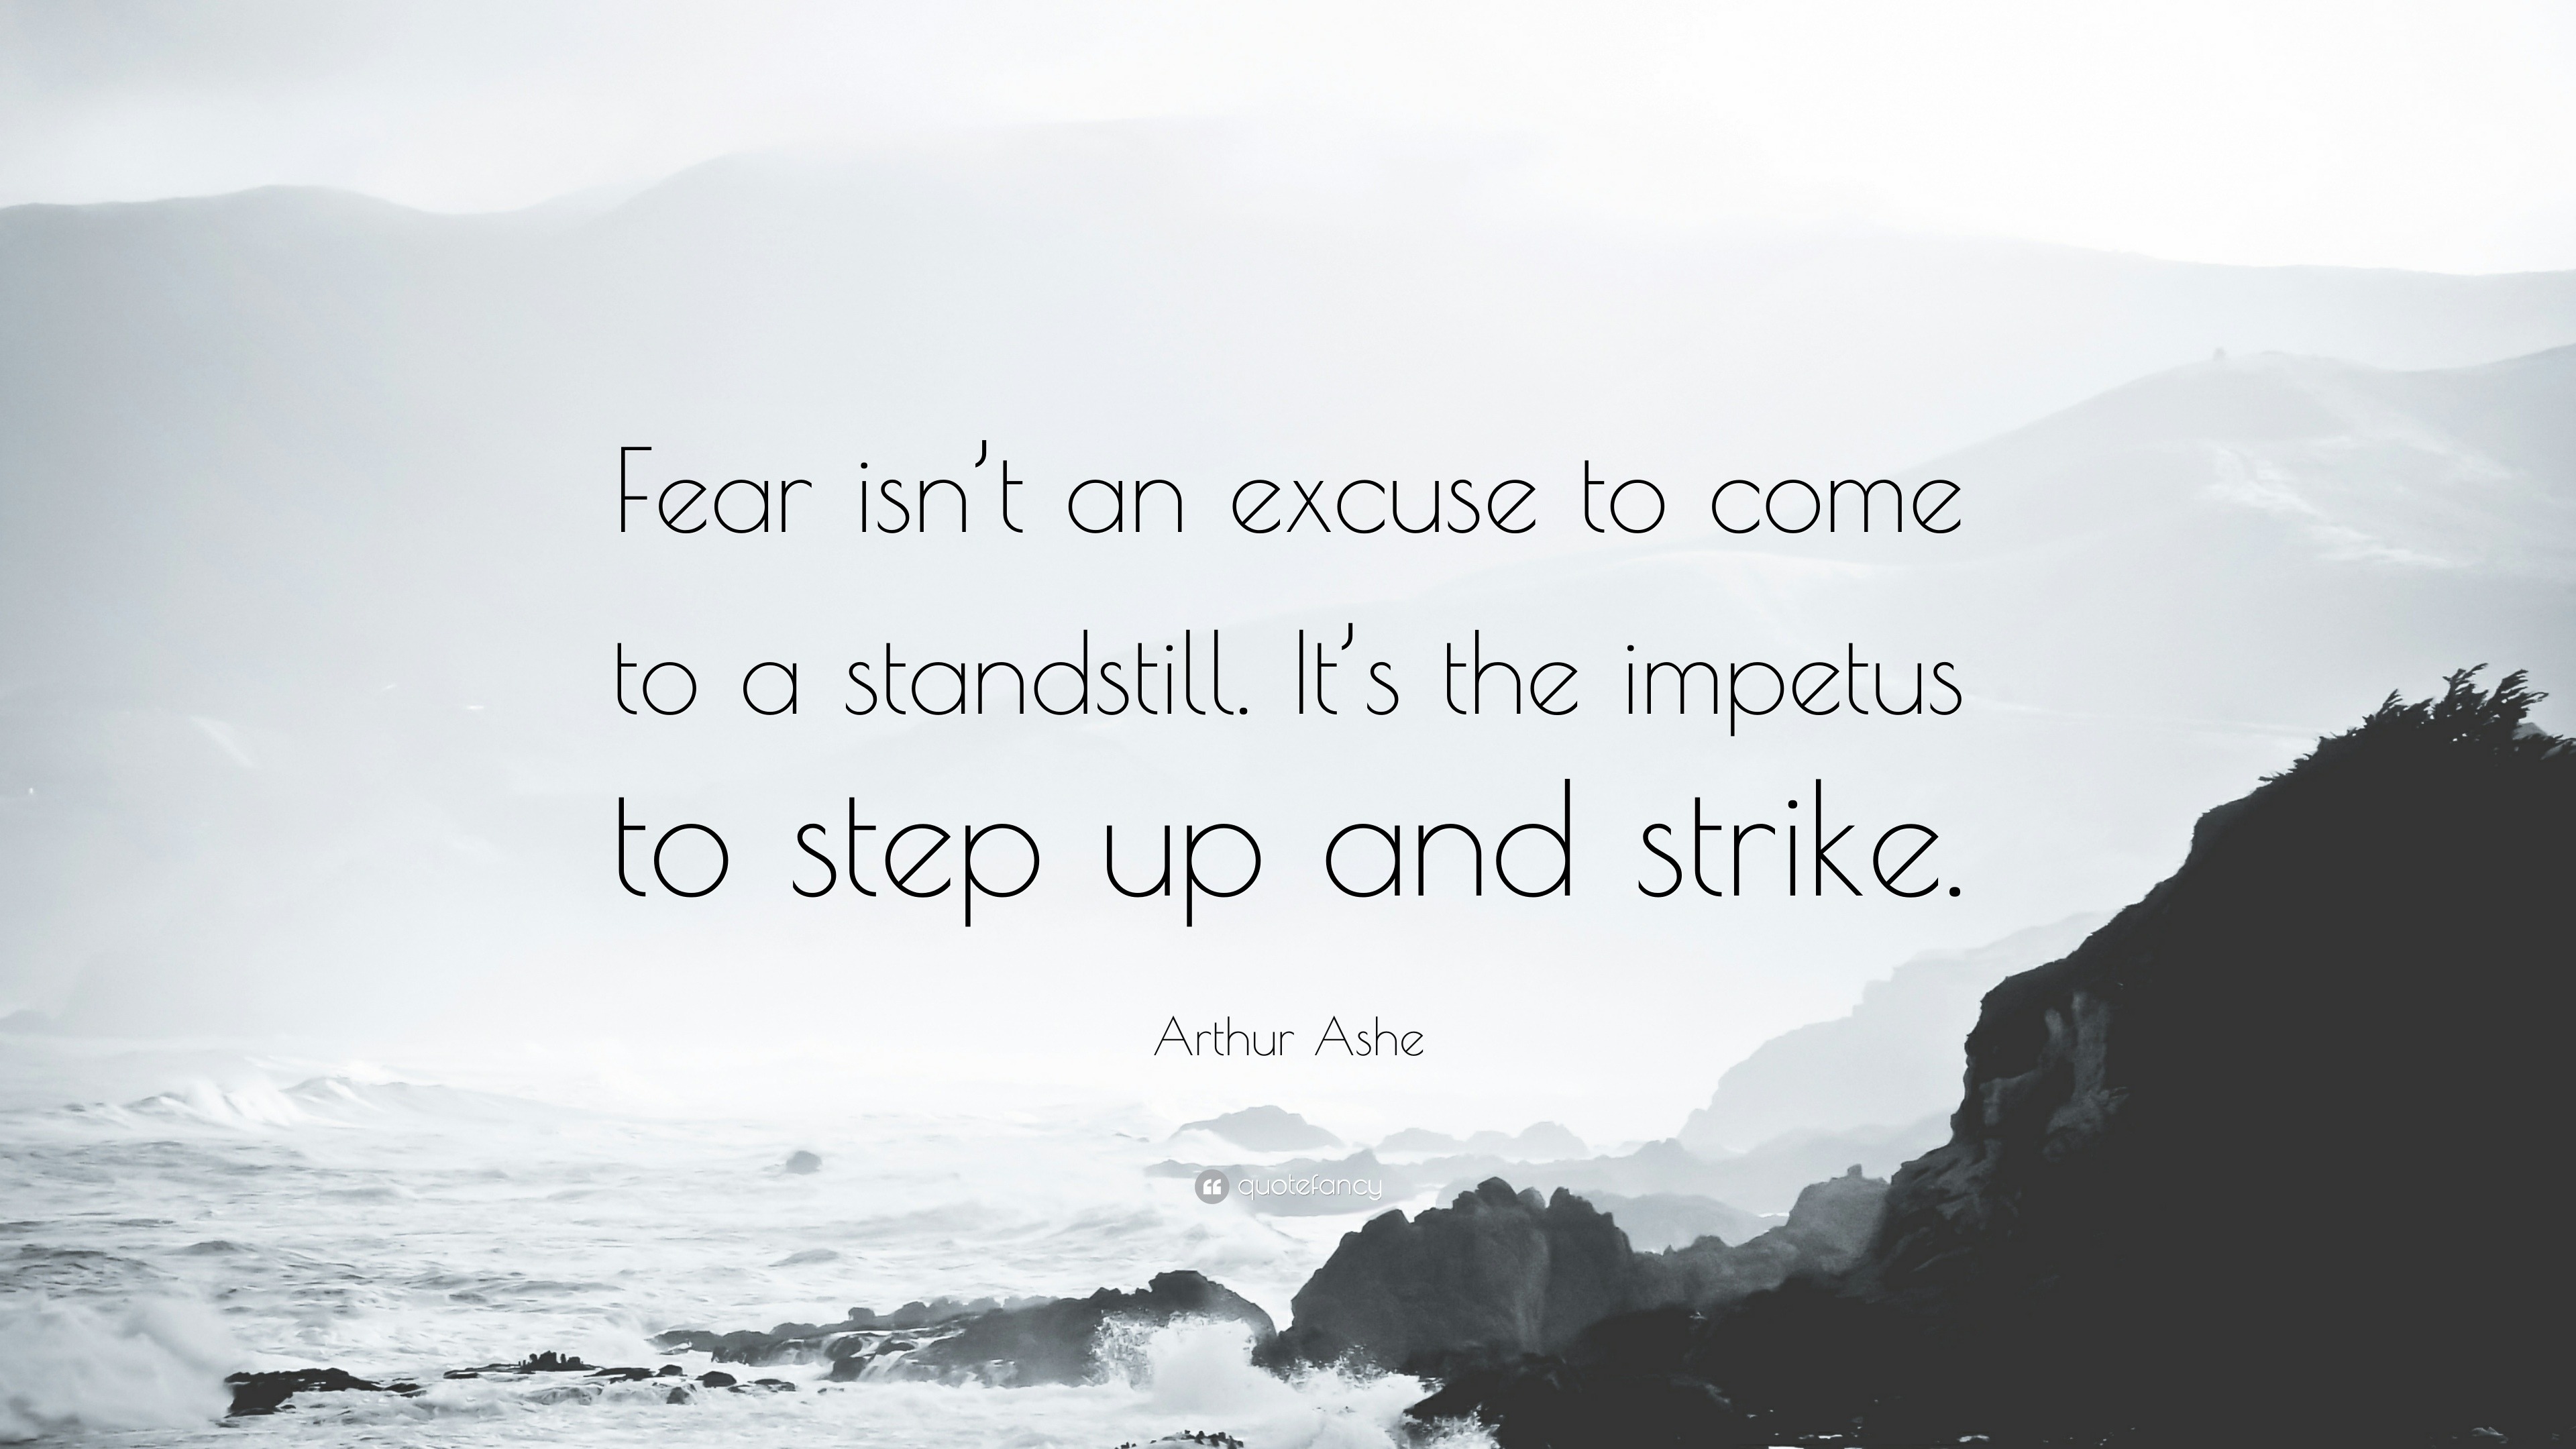 837085 Arthur Ashe Quote Fear isn t an excuse to come to a standstill It